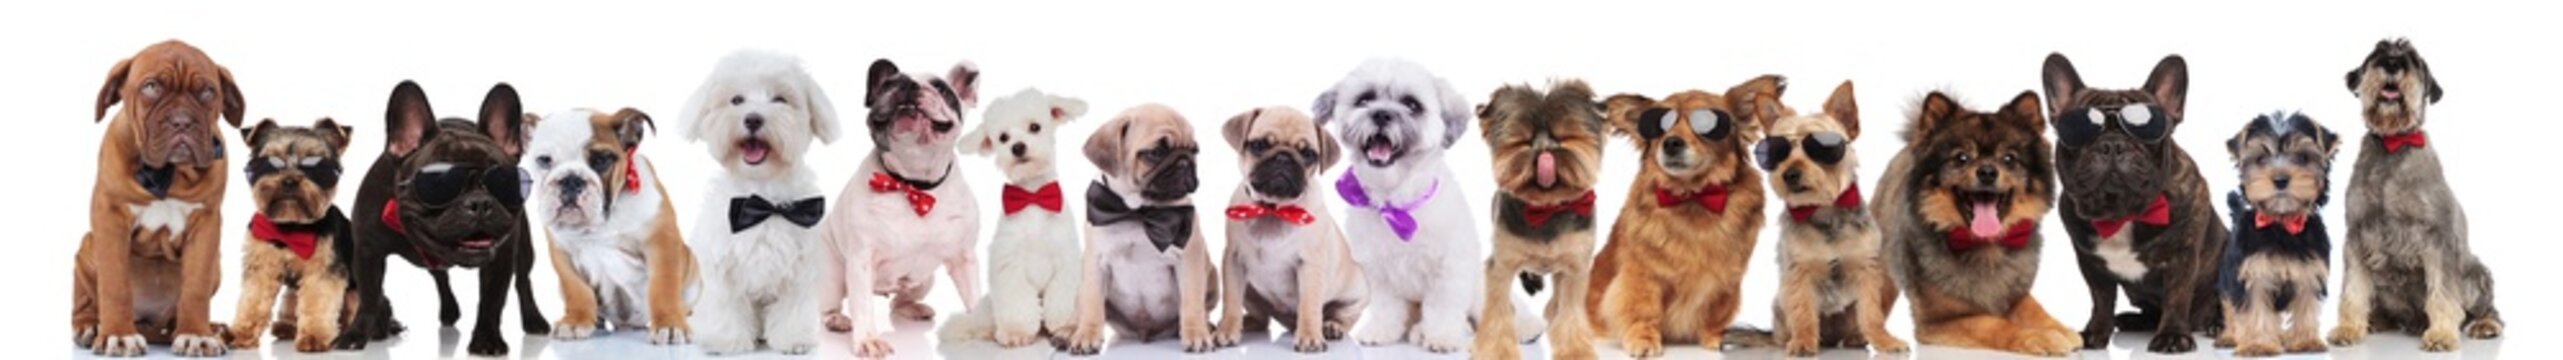 many stylish dogs of different breeds wearing bowties and sunglasses